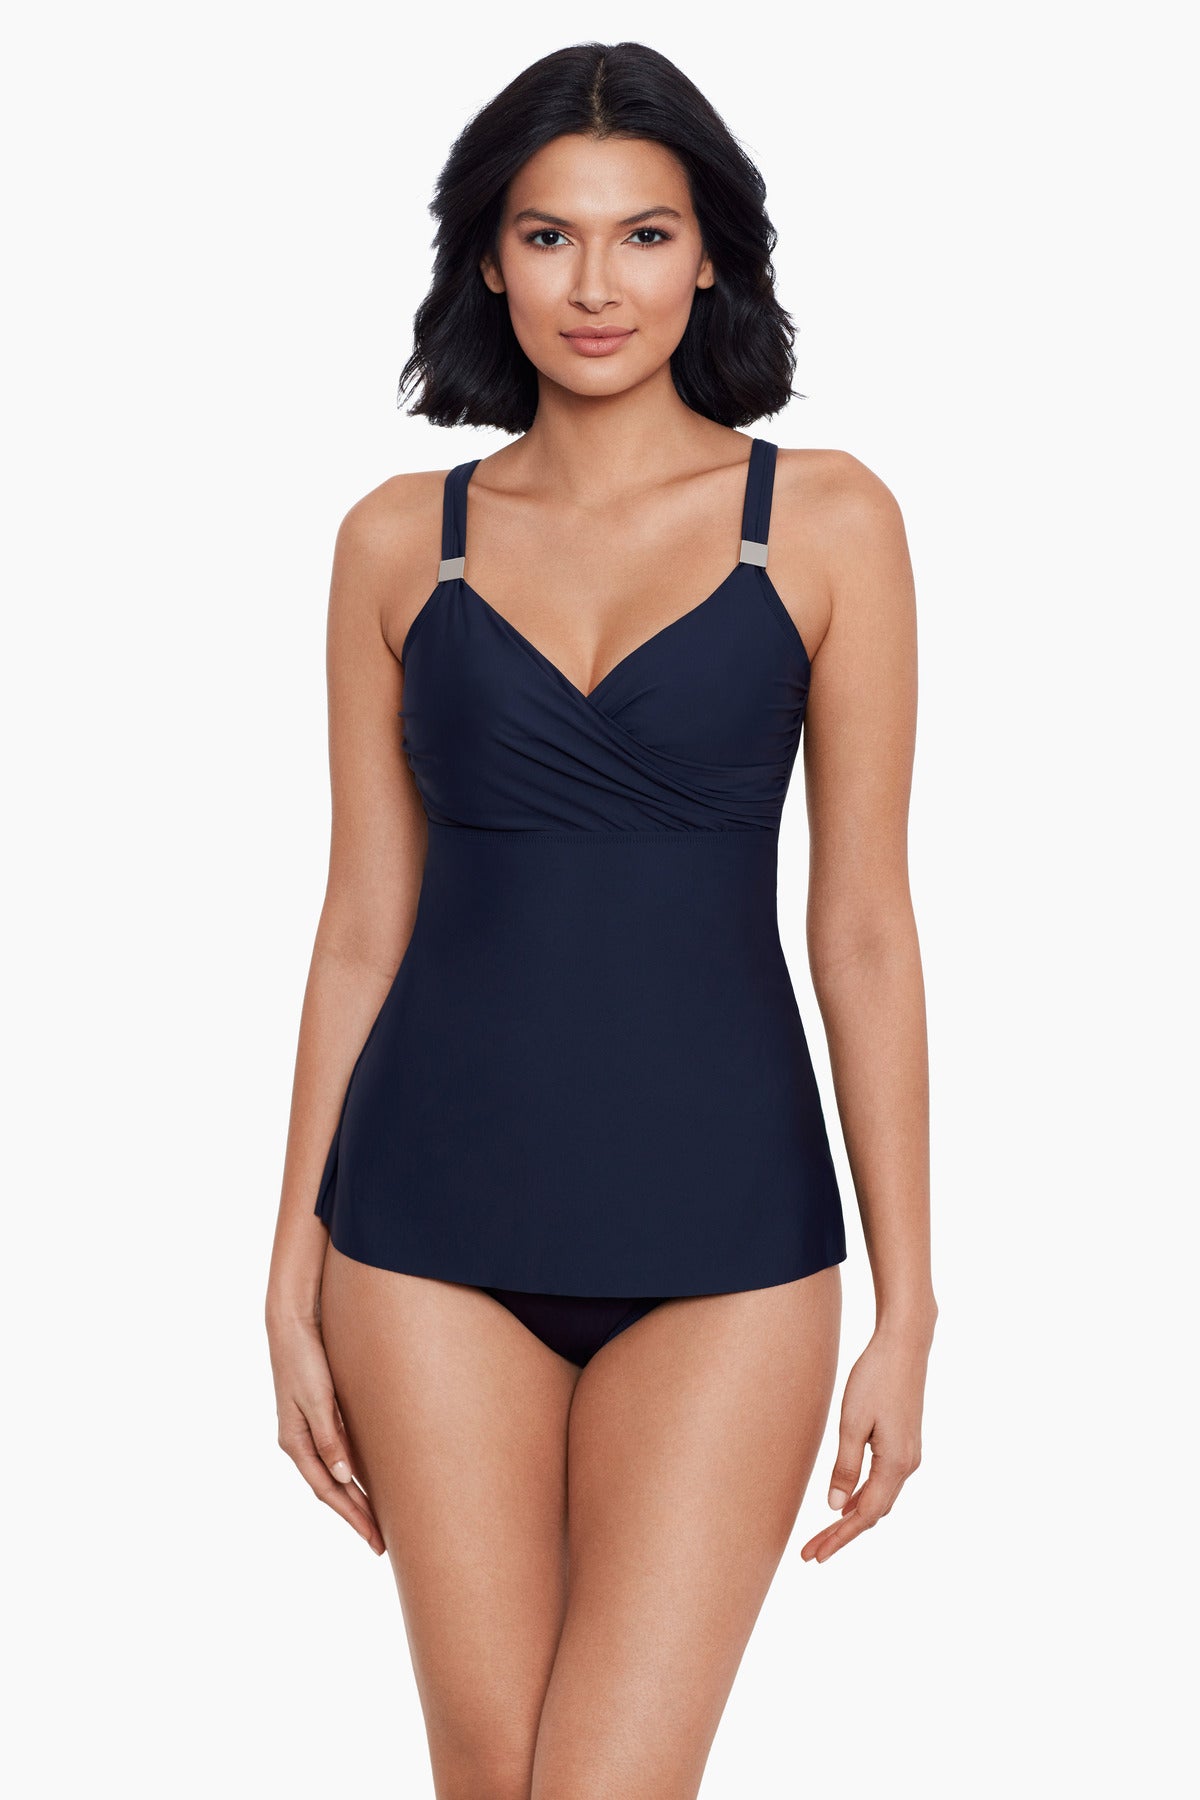 Swimsuits With Built-in Underwire Bra